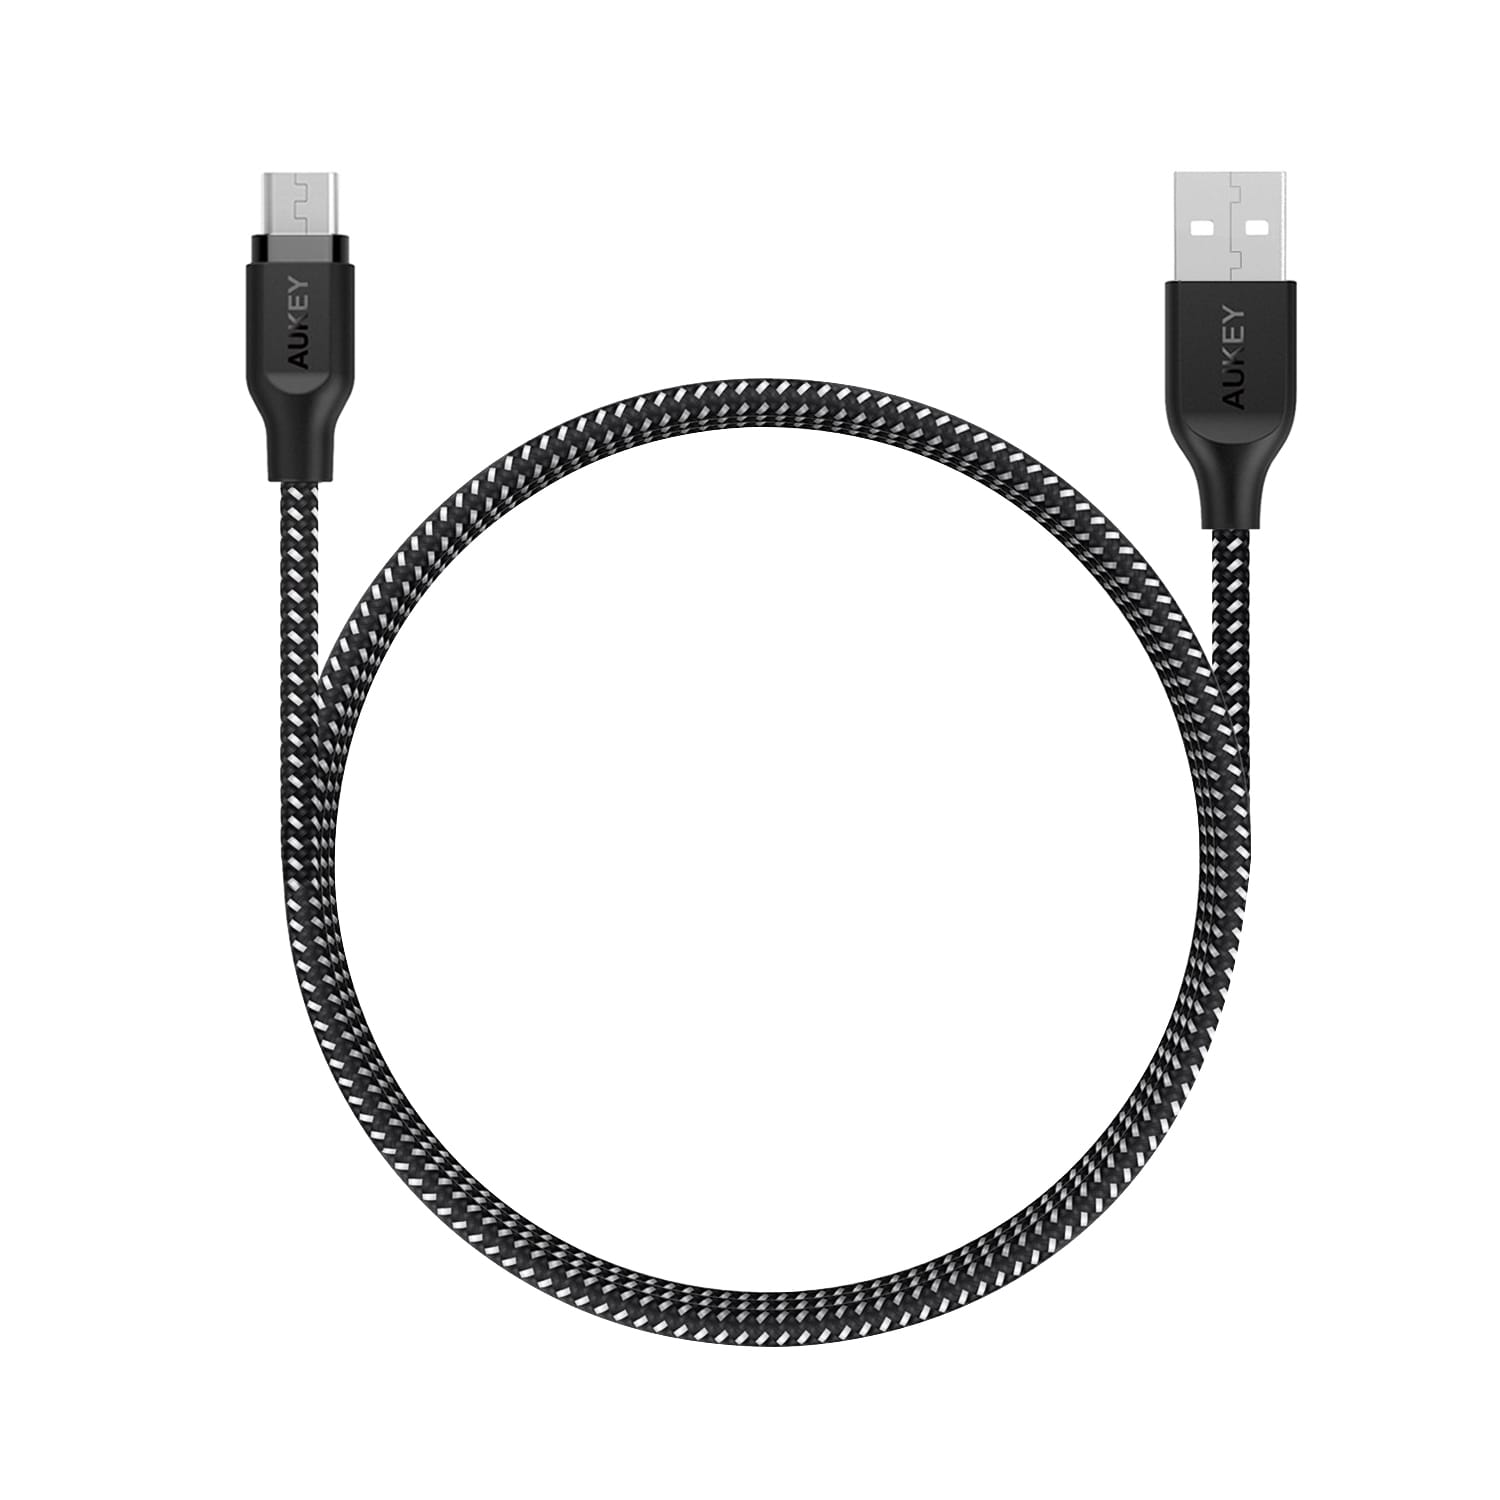 CB-AM2 Braided Nylon USB 2.0 to Micro USB Cable 2 meter